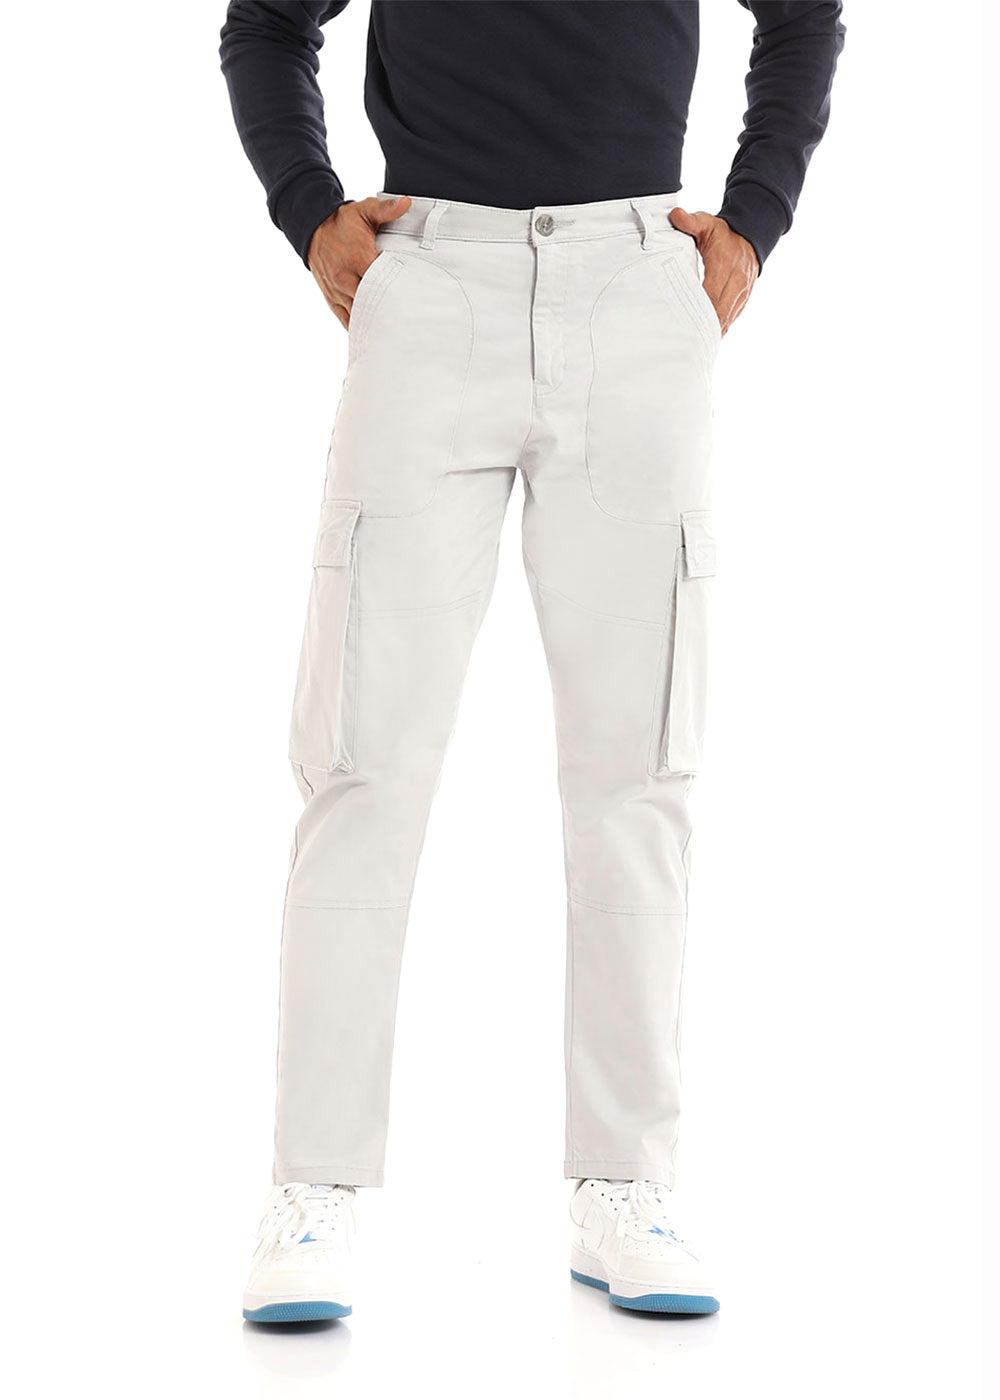 Cool Gray Cargo Pant 